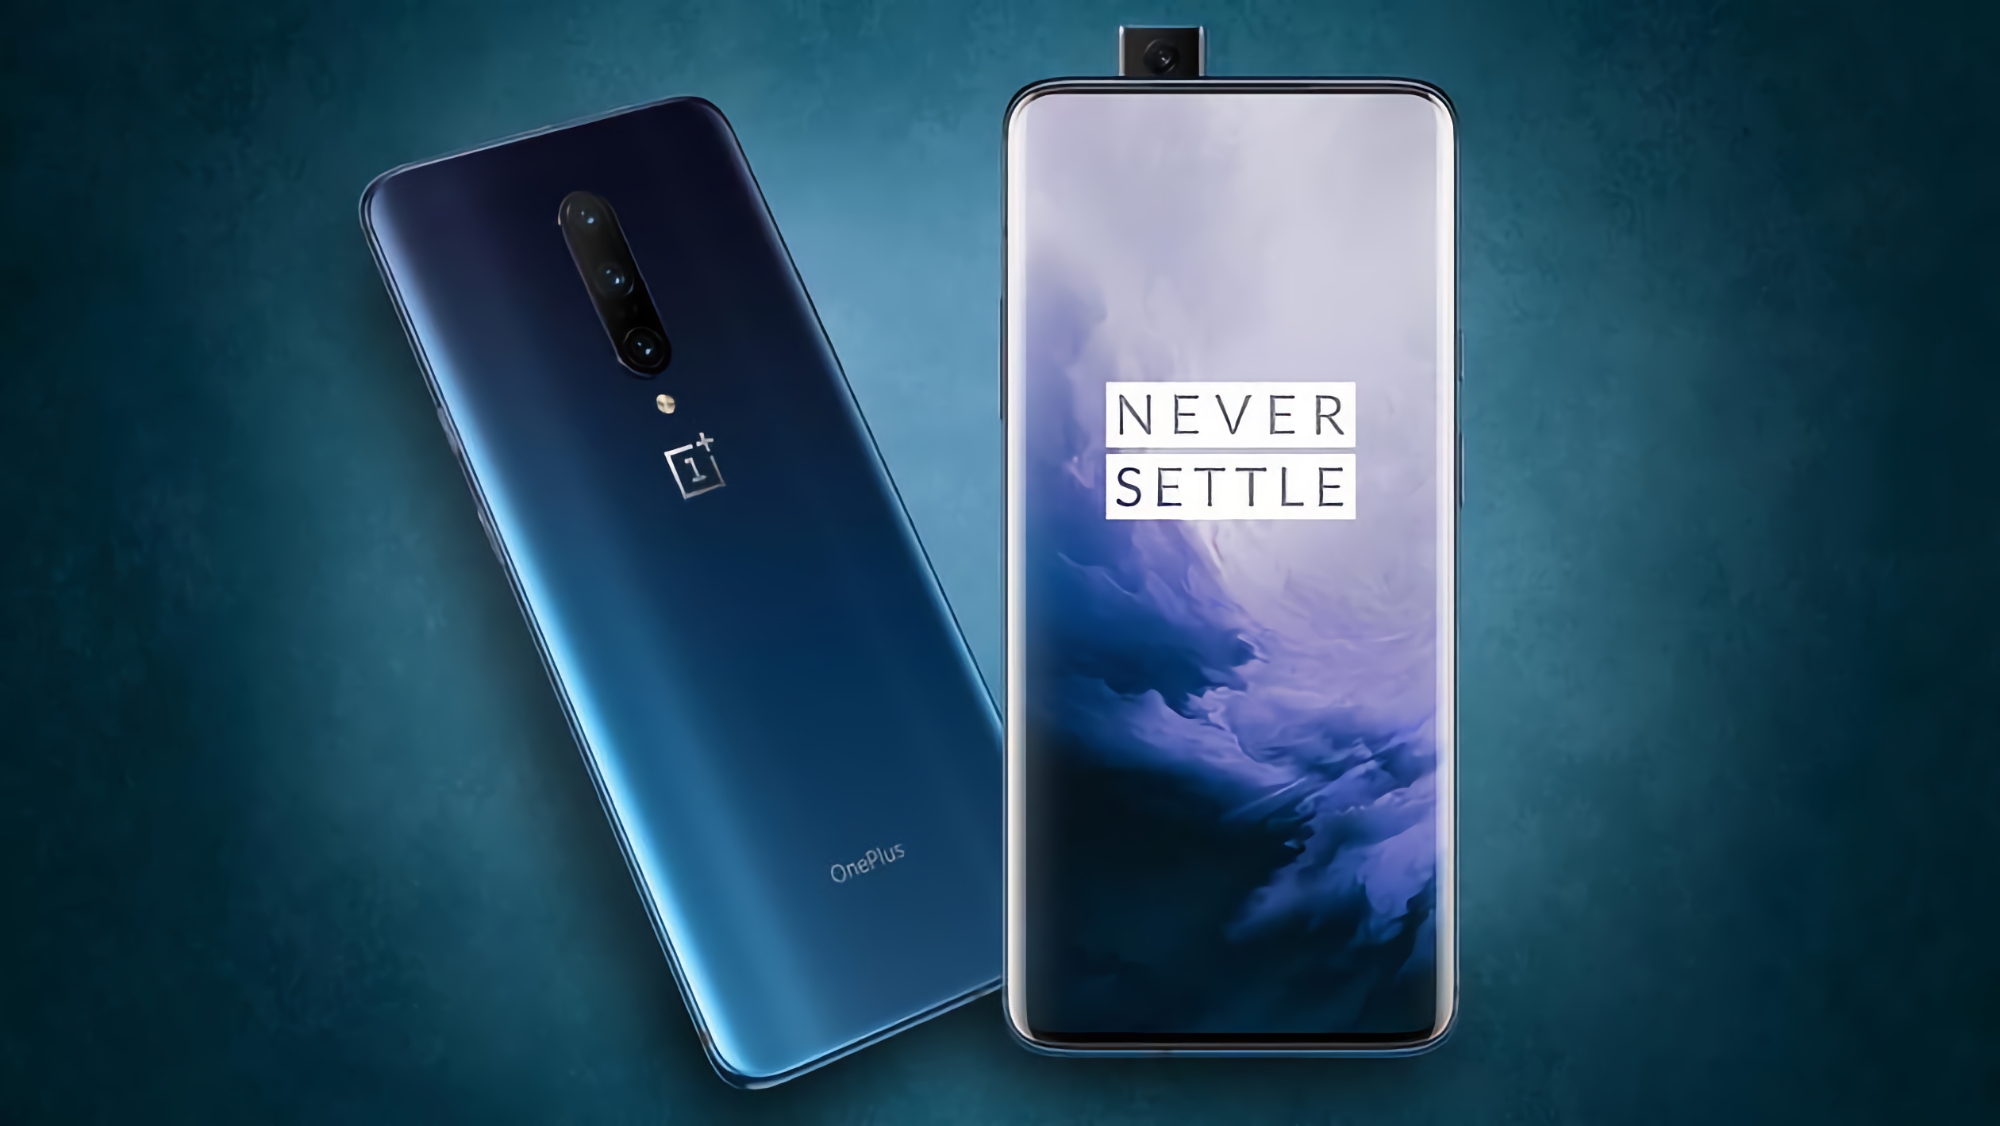 OnePlus 7, OnePlus 7 Pro, OnePlus 7T and OnePlus 7T Pro began receiving Android 12 updates with OxygenOS 12 in Europe